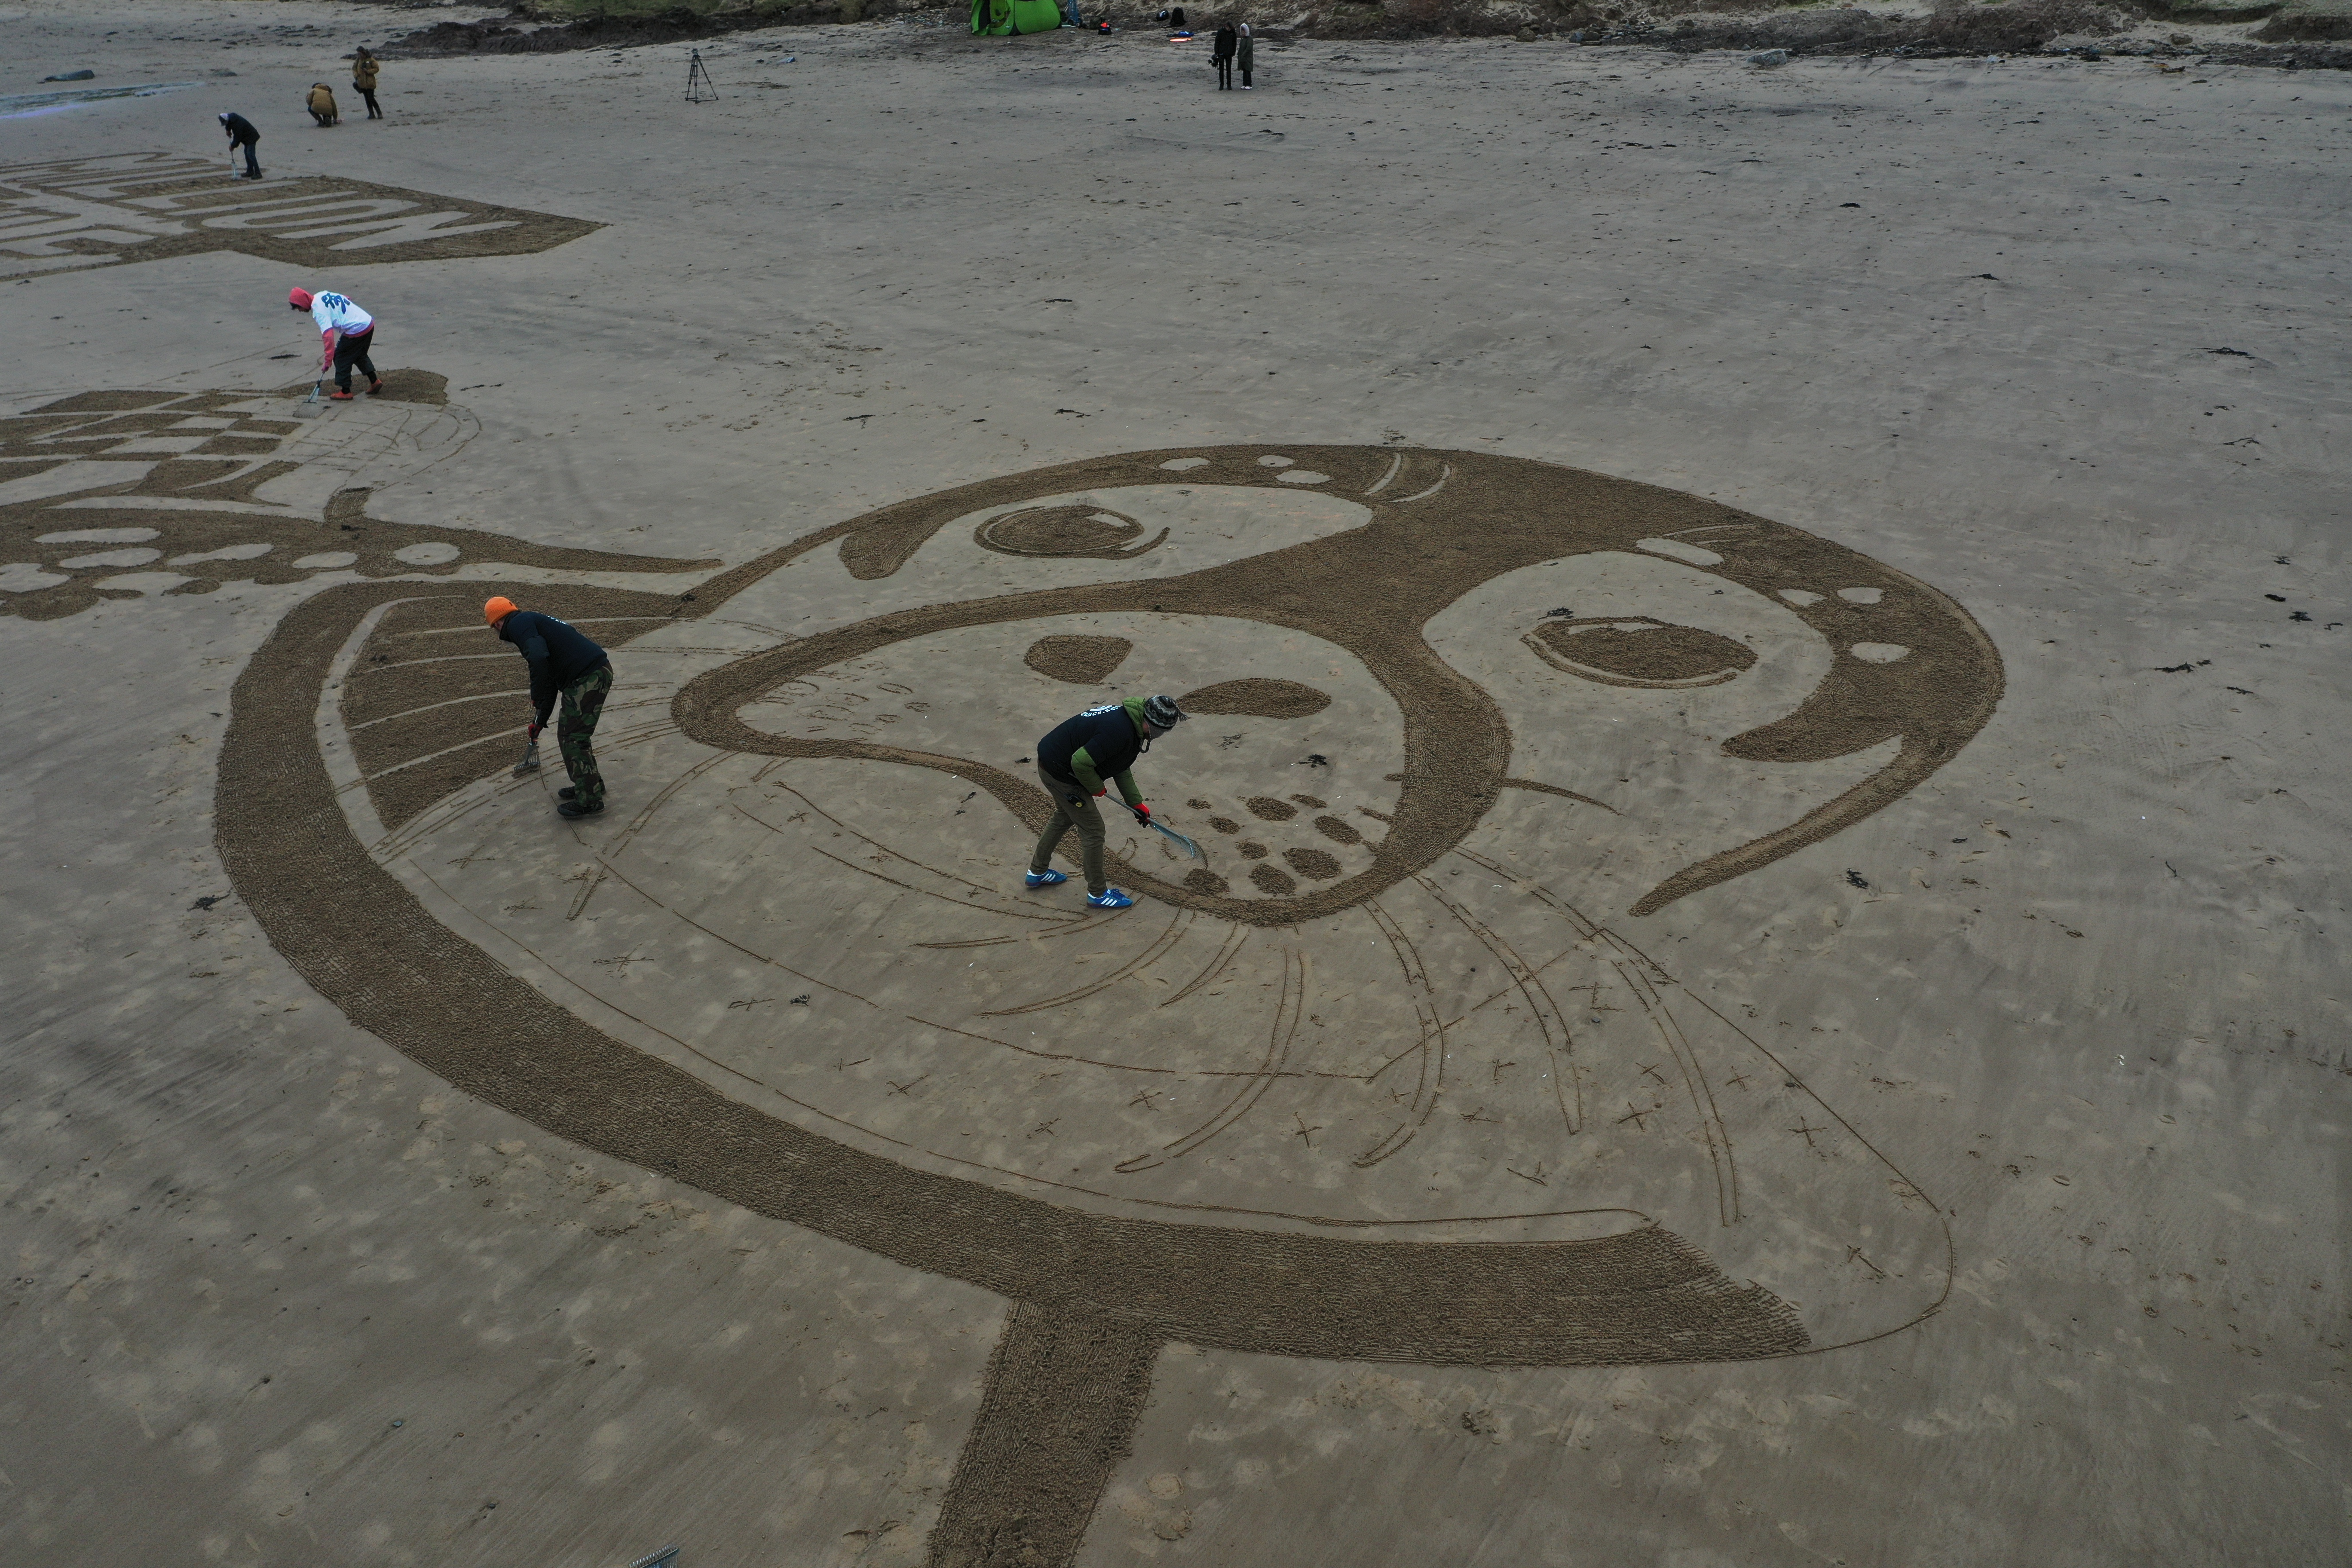 Members of the team creating the sand drawing work on the seal's face